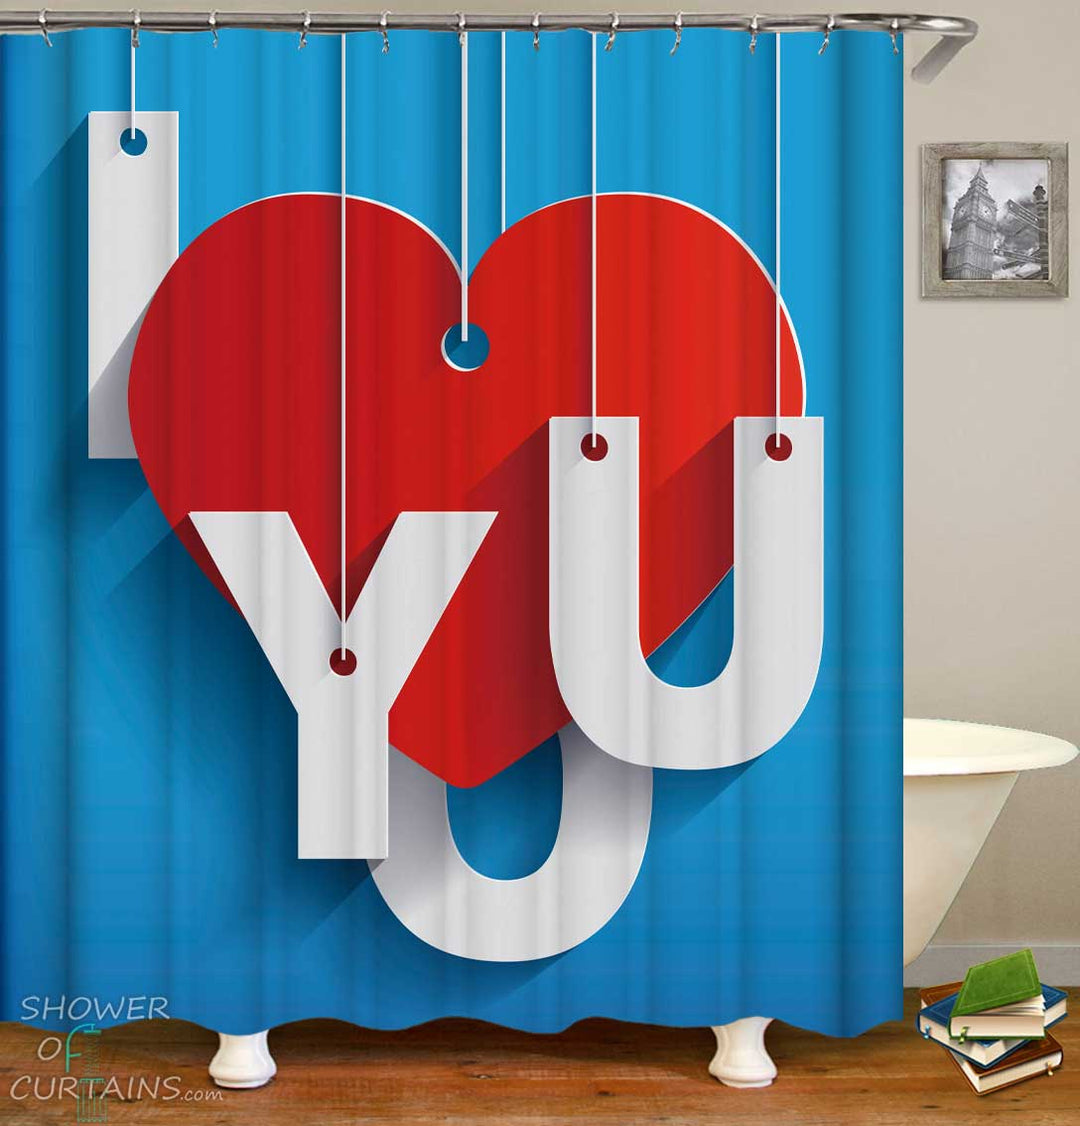 Shower Curtains with I Love You over Blue